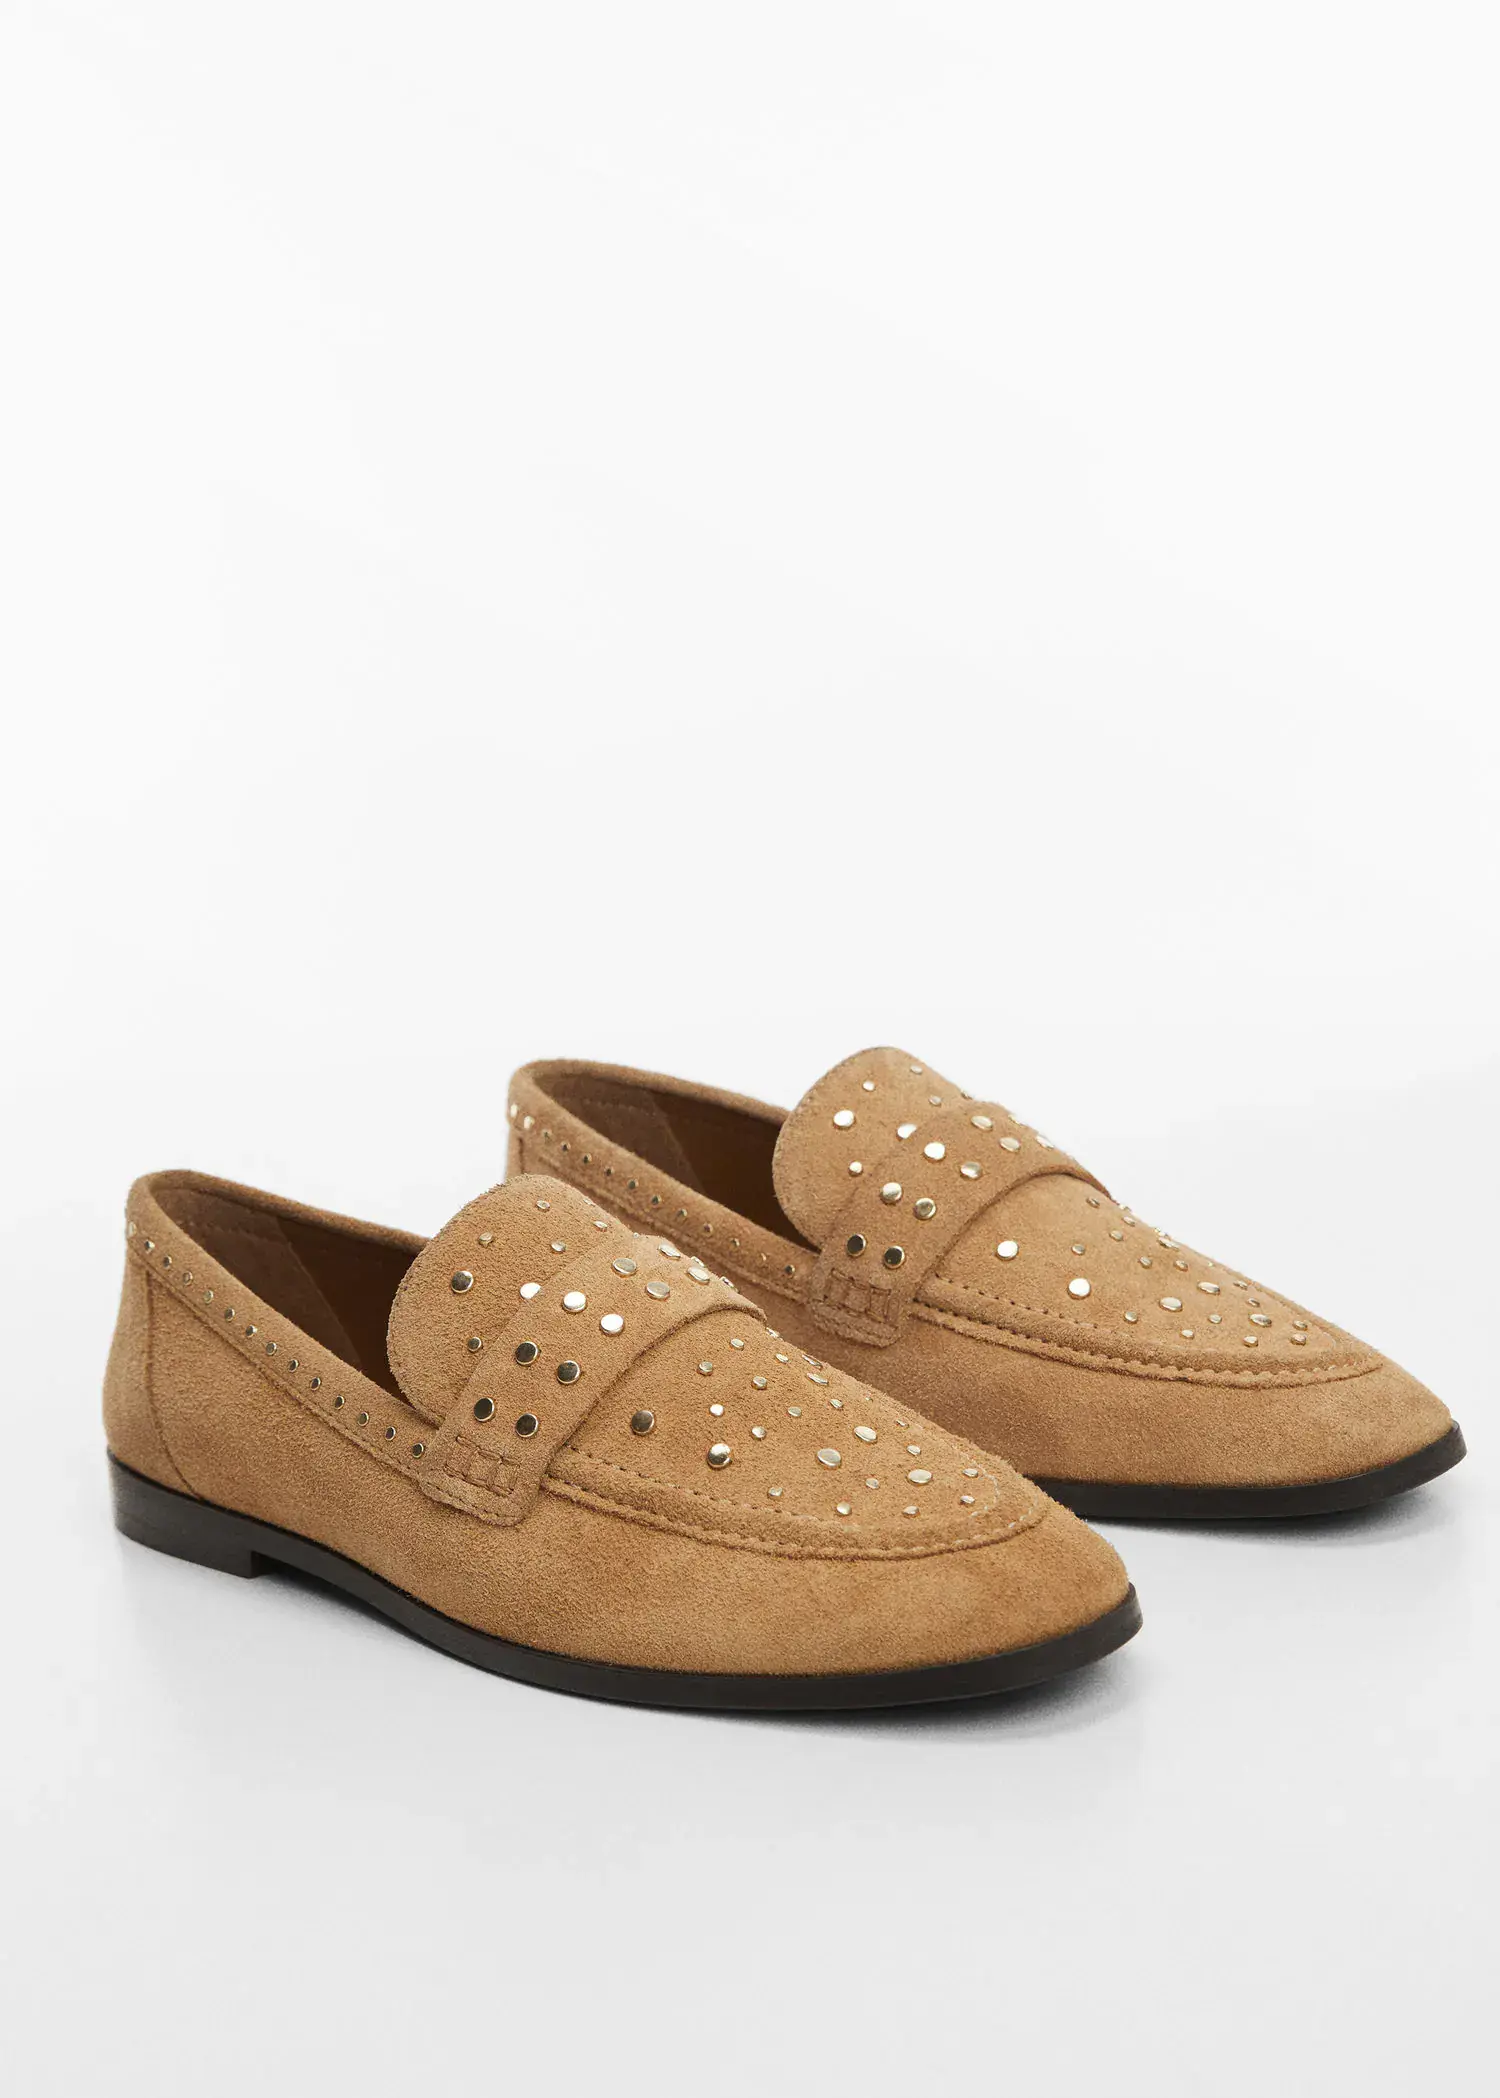 Mango Studded leather loafers. 1